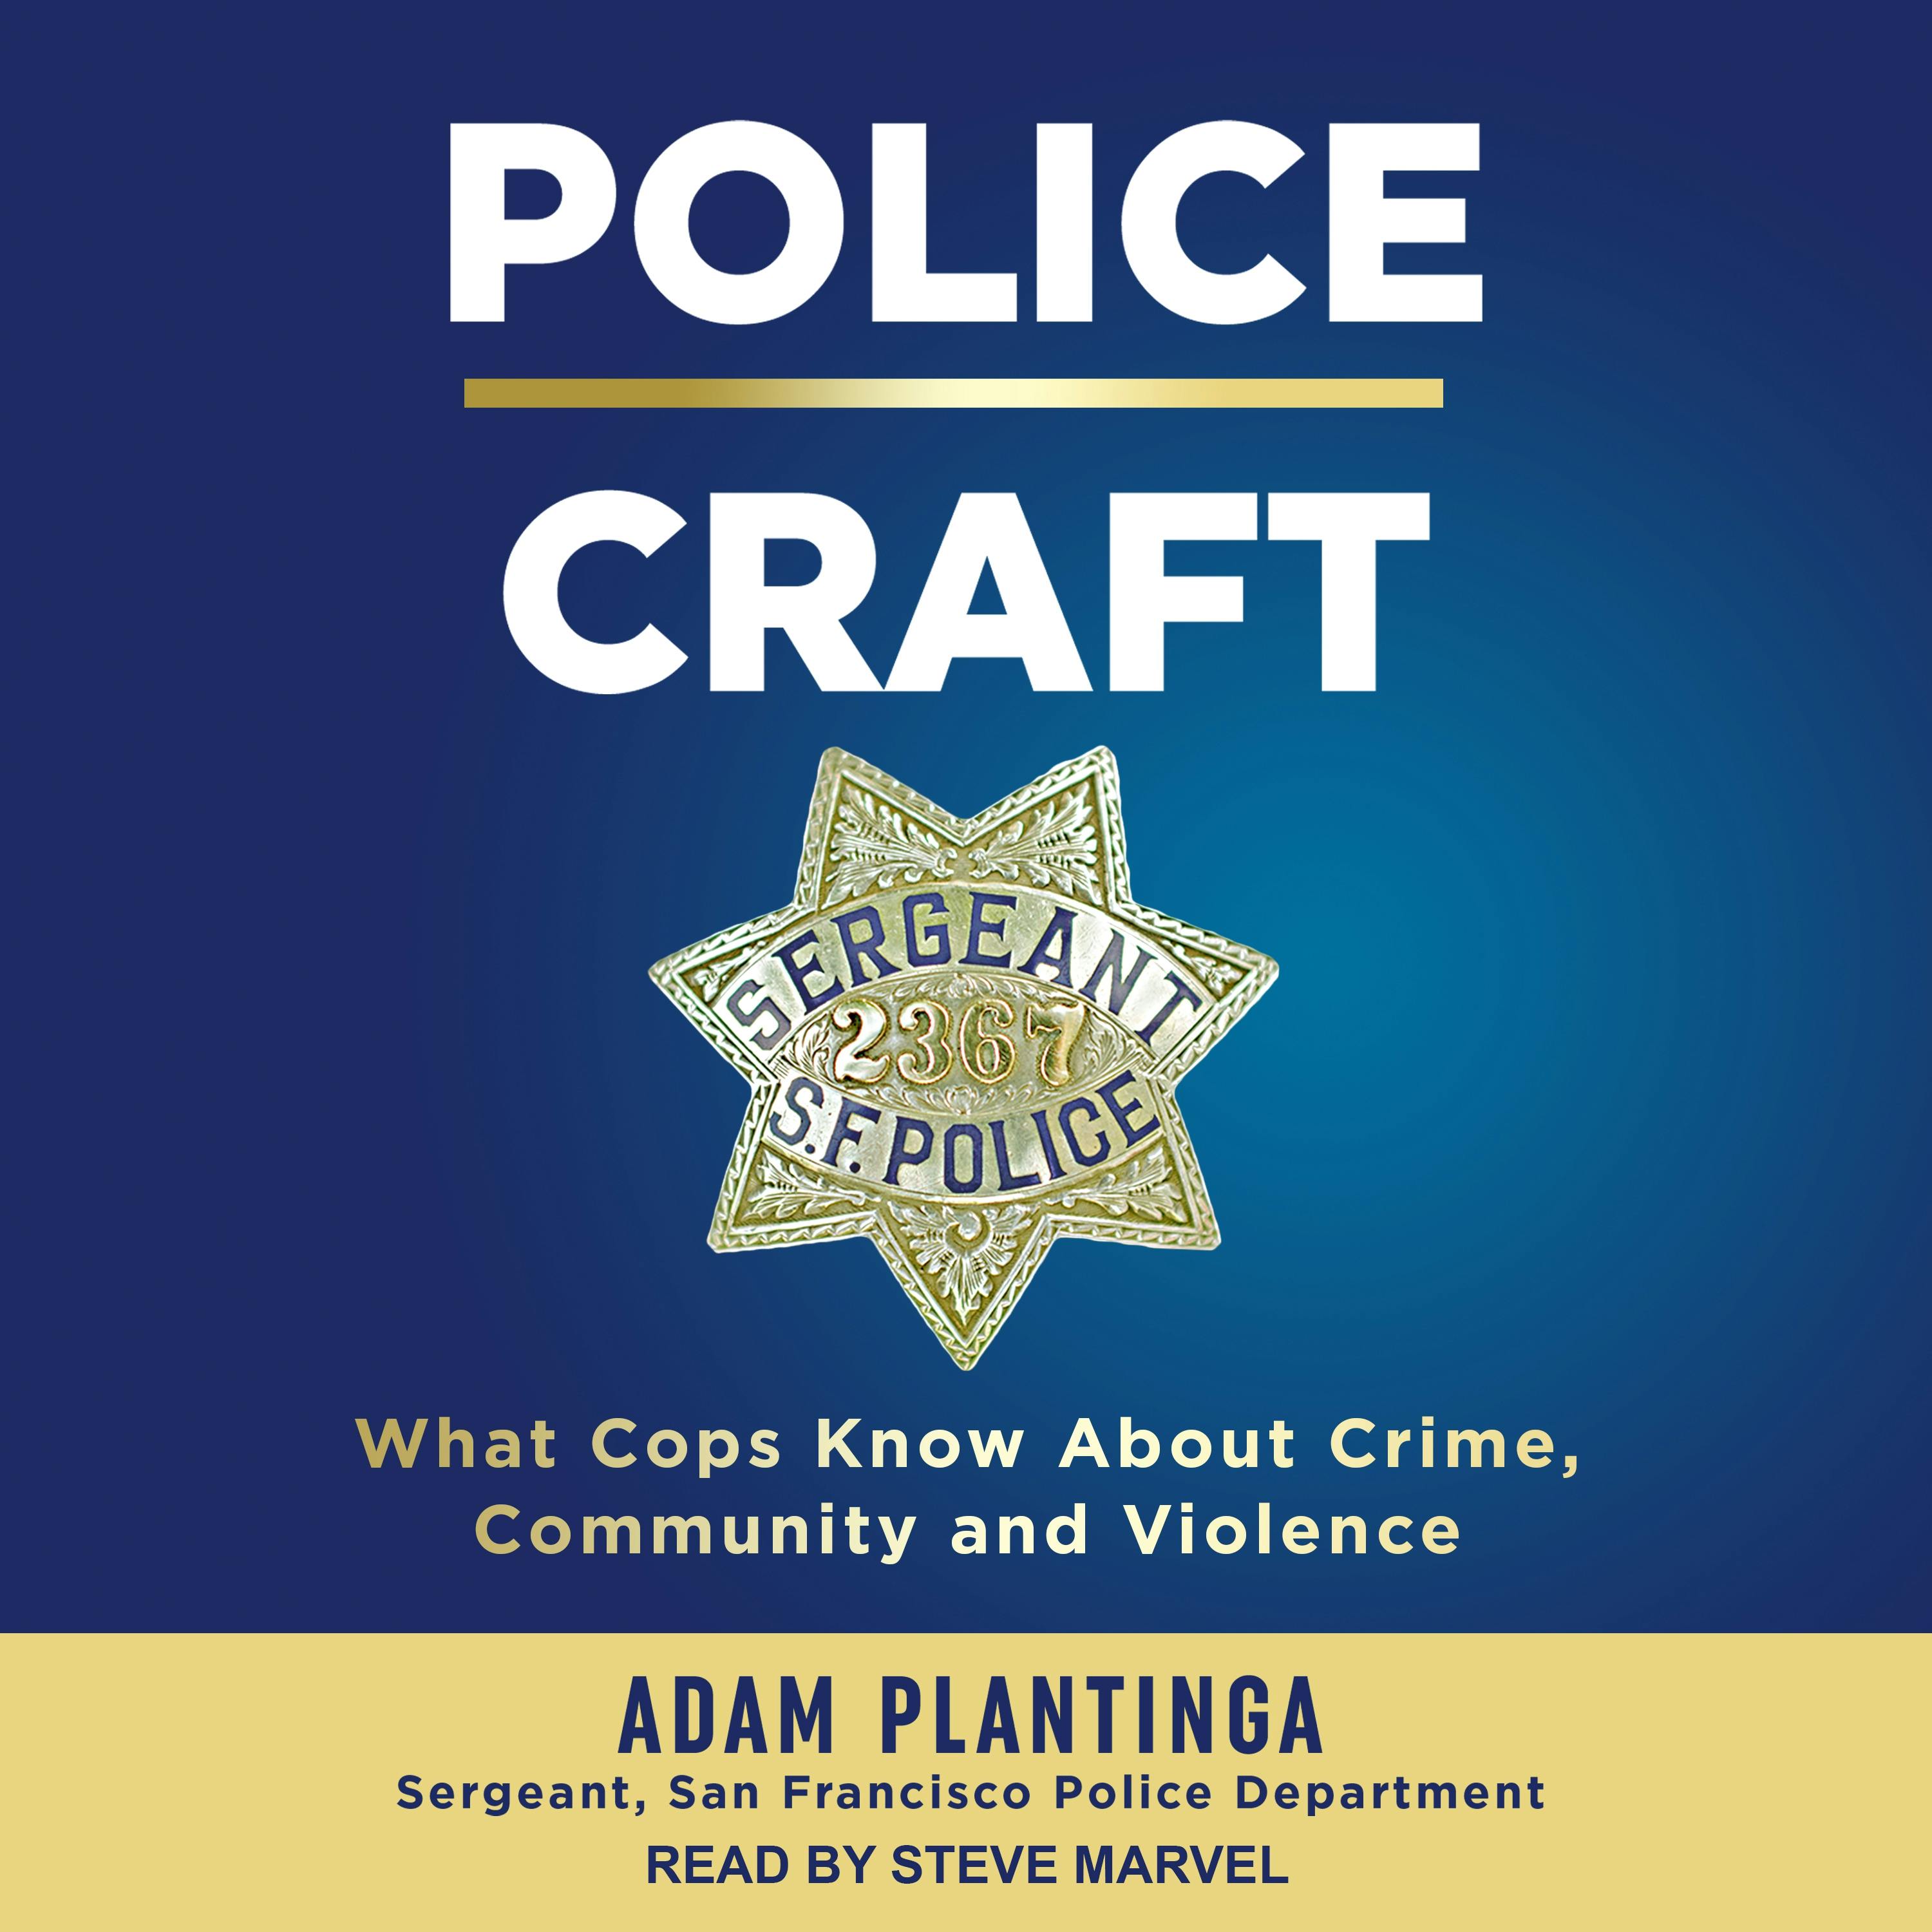 Police Craft: What Cops Know About Crime, Community and Violence - Adam Plantinga